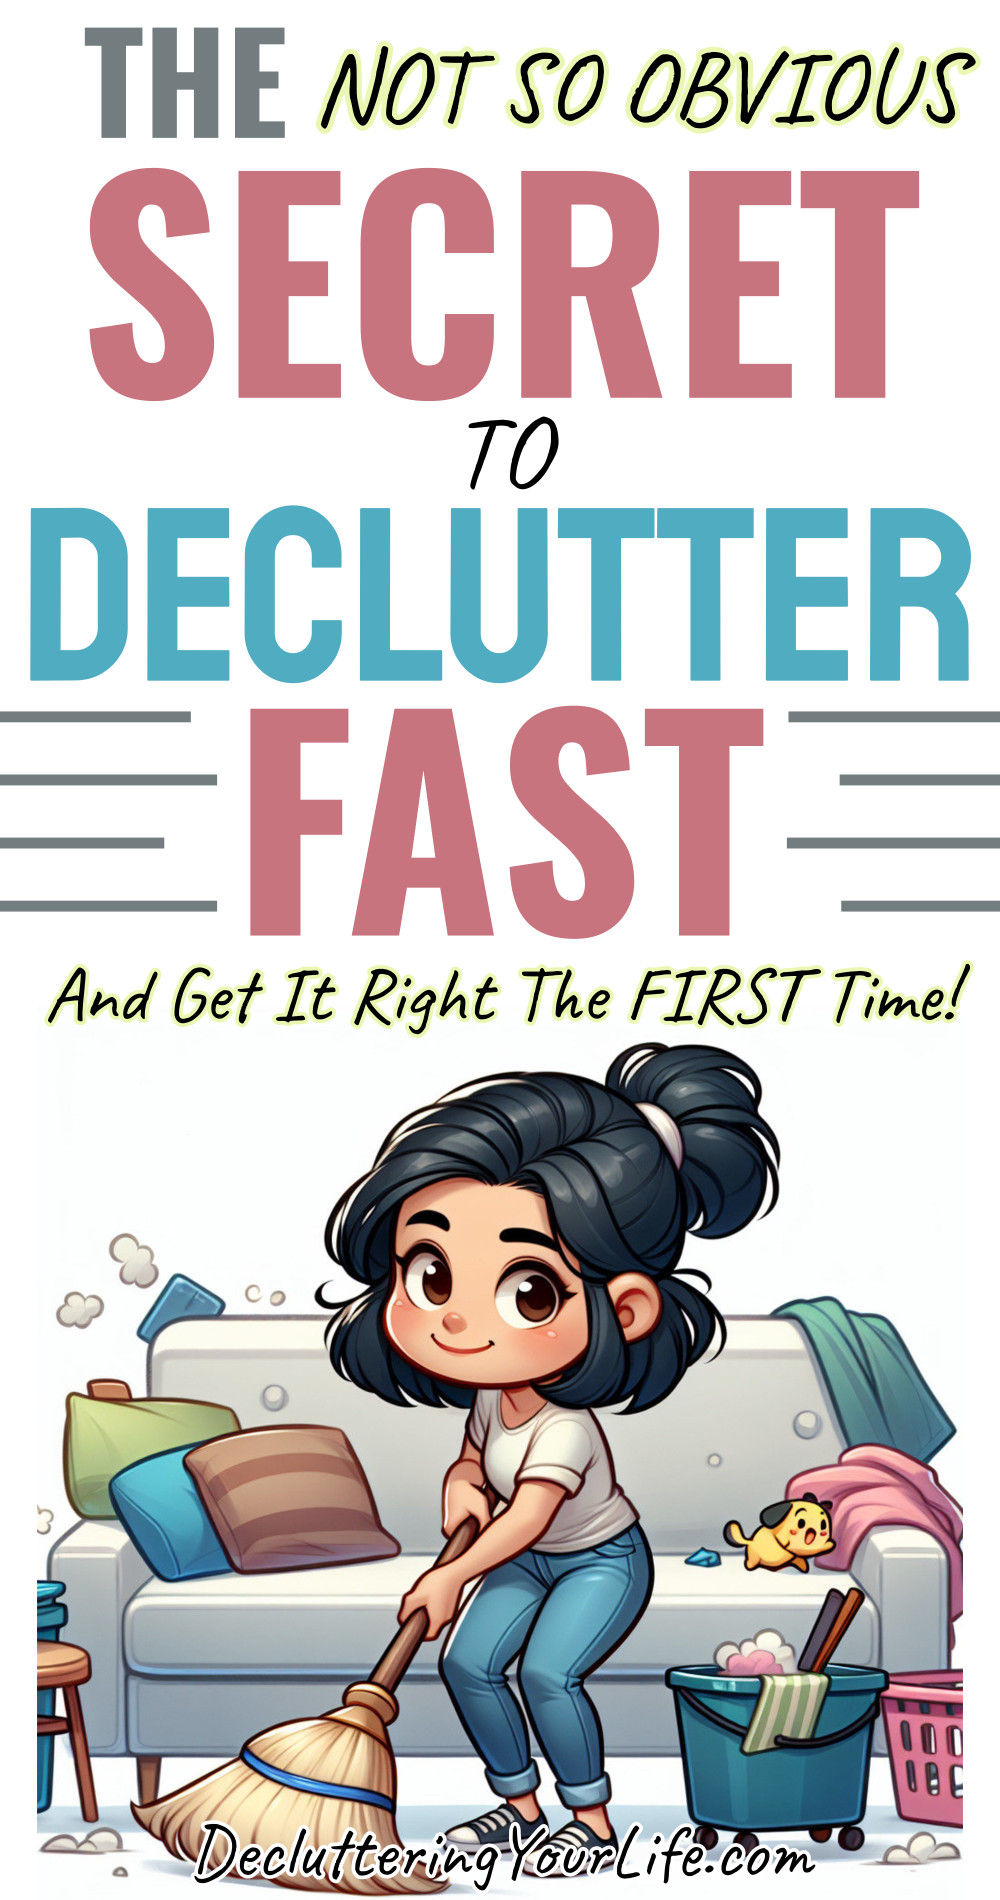 the secret to declutter fast